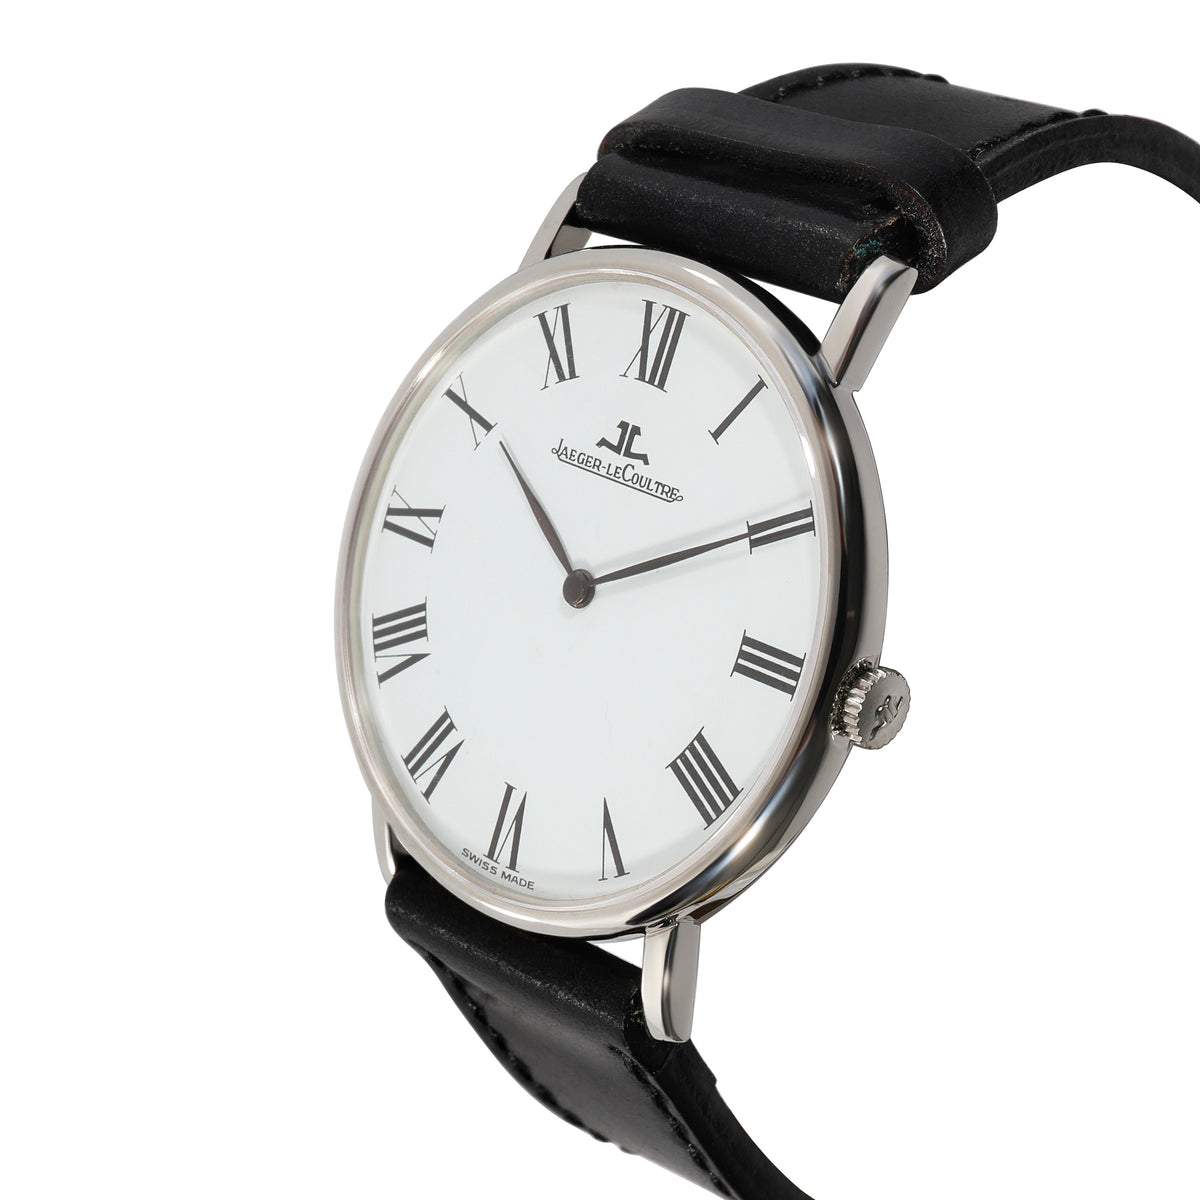 Jaeger-LeCoultre Classique 9226.42 Unisex Watch in  Stainless Steel